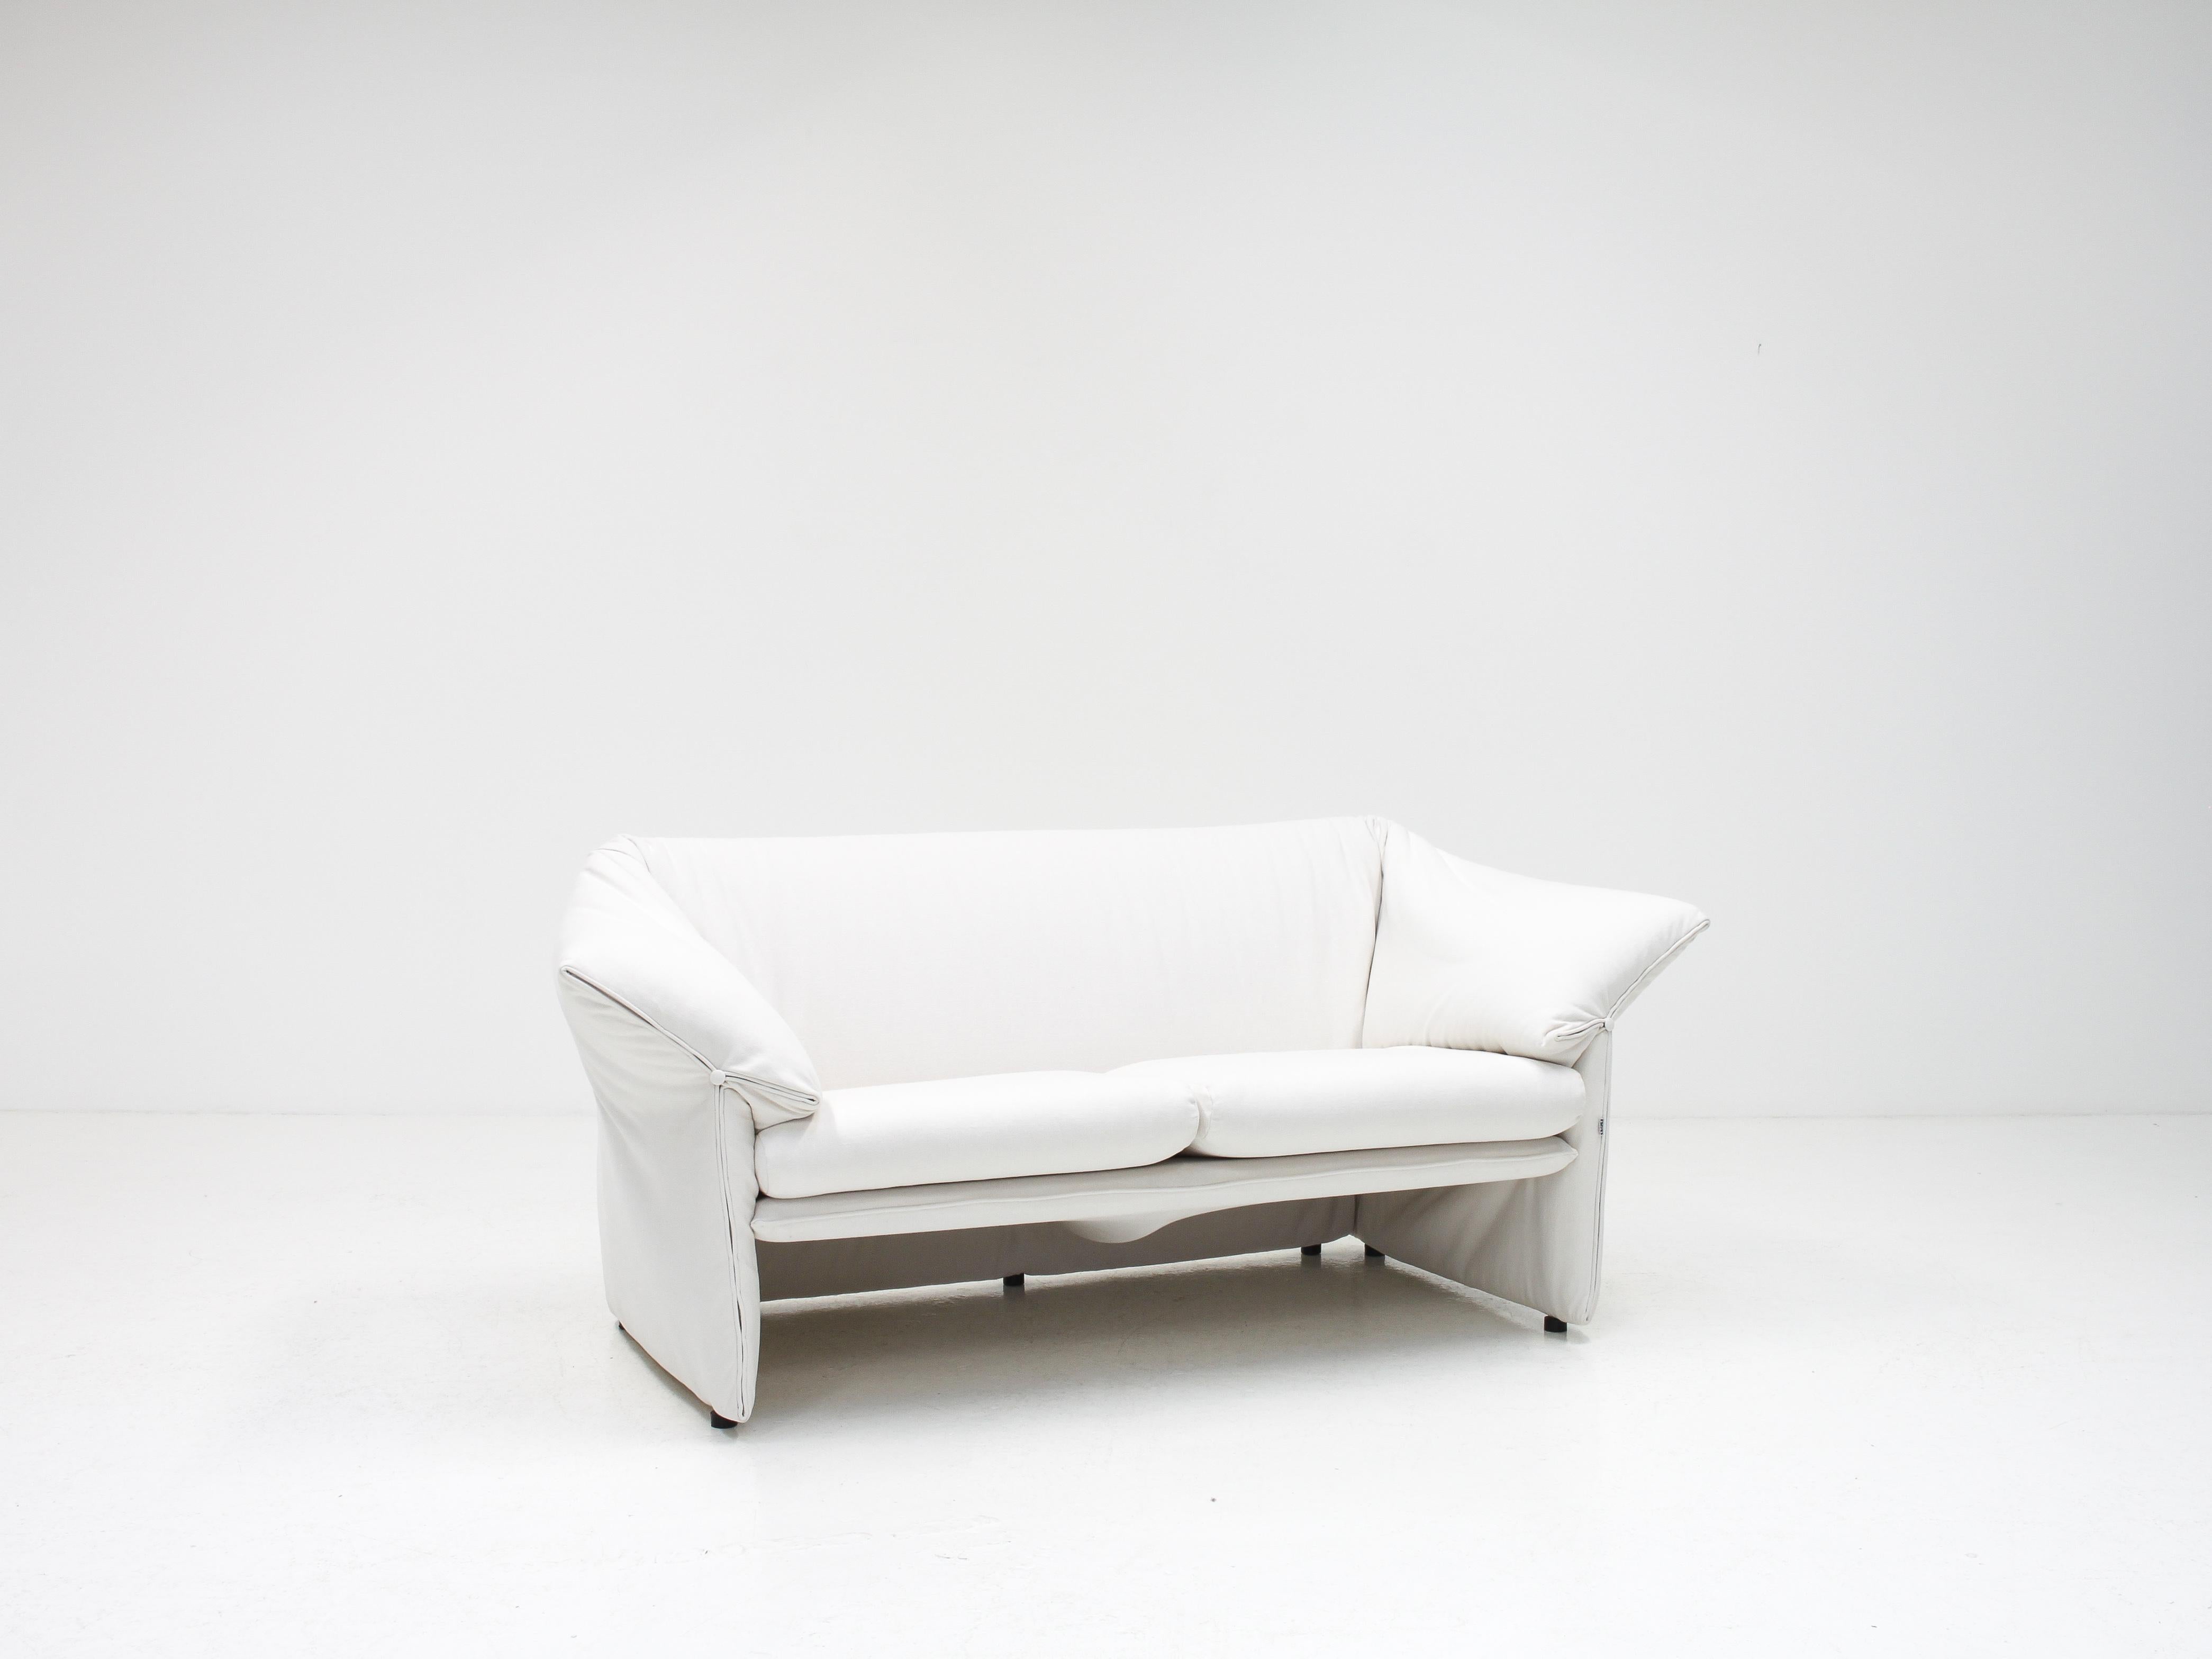  'Le Stelle' Loveseat Sofa by Mario Bellini for B&B Italia, 1974, Reupholstered 6